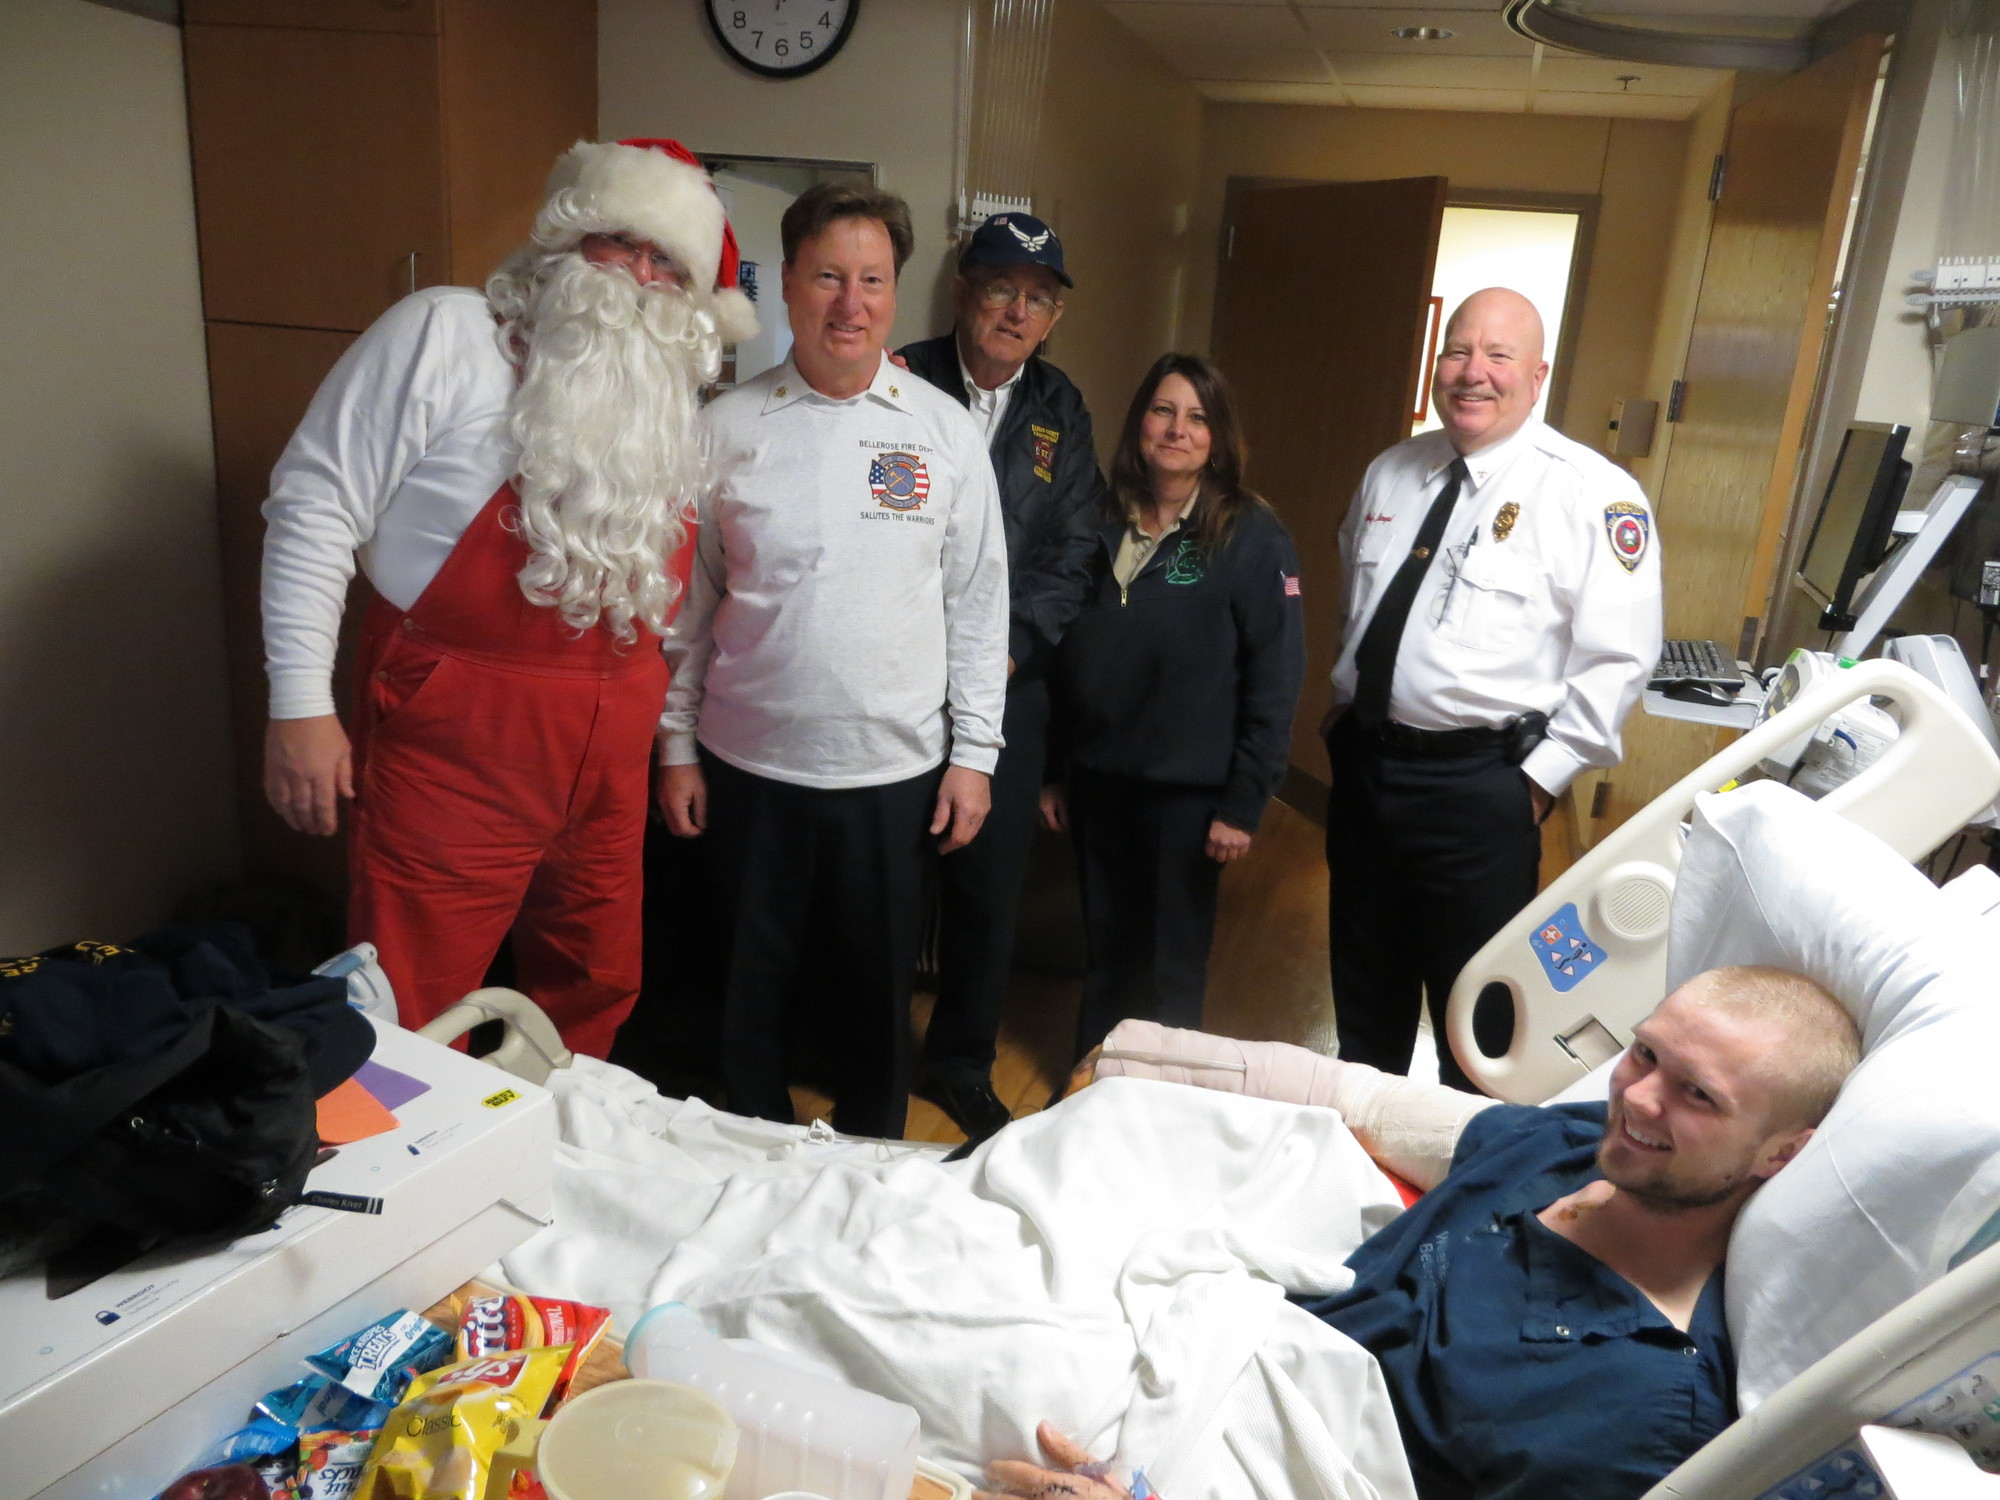 A happy Christmas SEAL:
On Dec. 5, a wounded Navy SEAL hospitalized at the Walter Reed National Military Medical Center in Bethesda, MD, welcomed a few special vistors bearing gifts — including a new laptop computer. At his bedside were, from left, Santa Claus (Terrence Powderly) and John Cortapasso, from the Bellerose Fire Department, and Lynbrook Fire Department members Jack Callahan, Lynn Donnelly and Chief Carl Lengel.